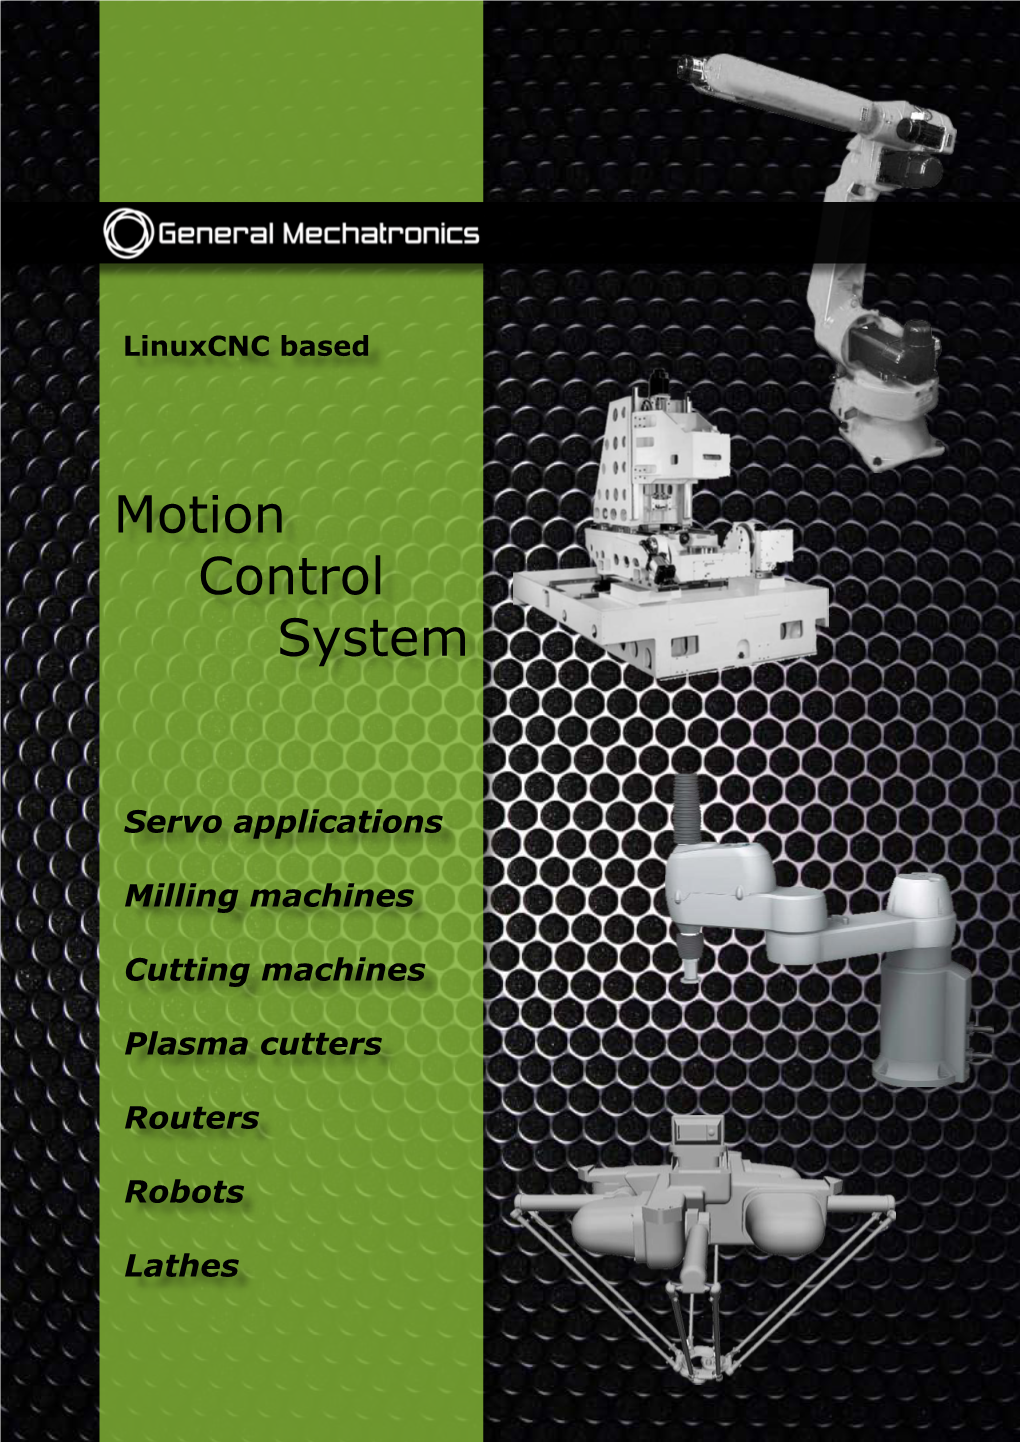 Motion Control System Brochure